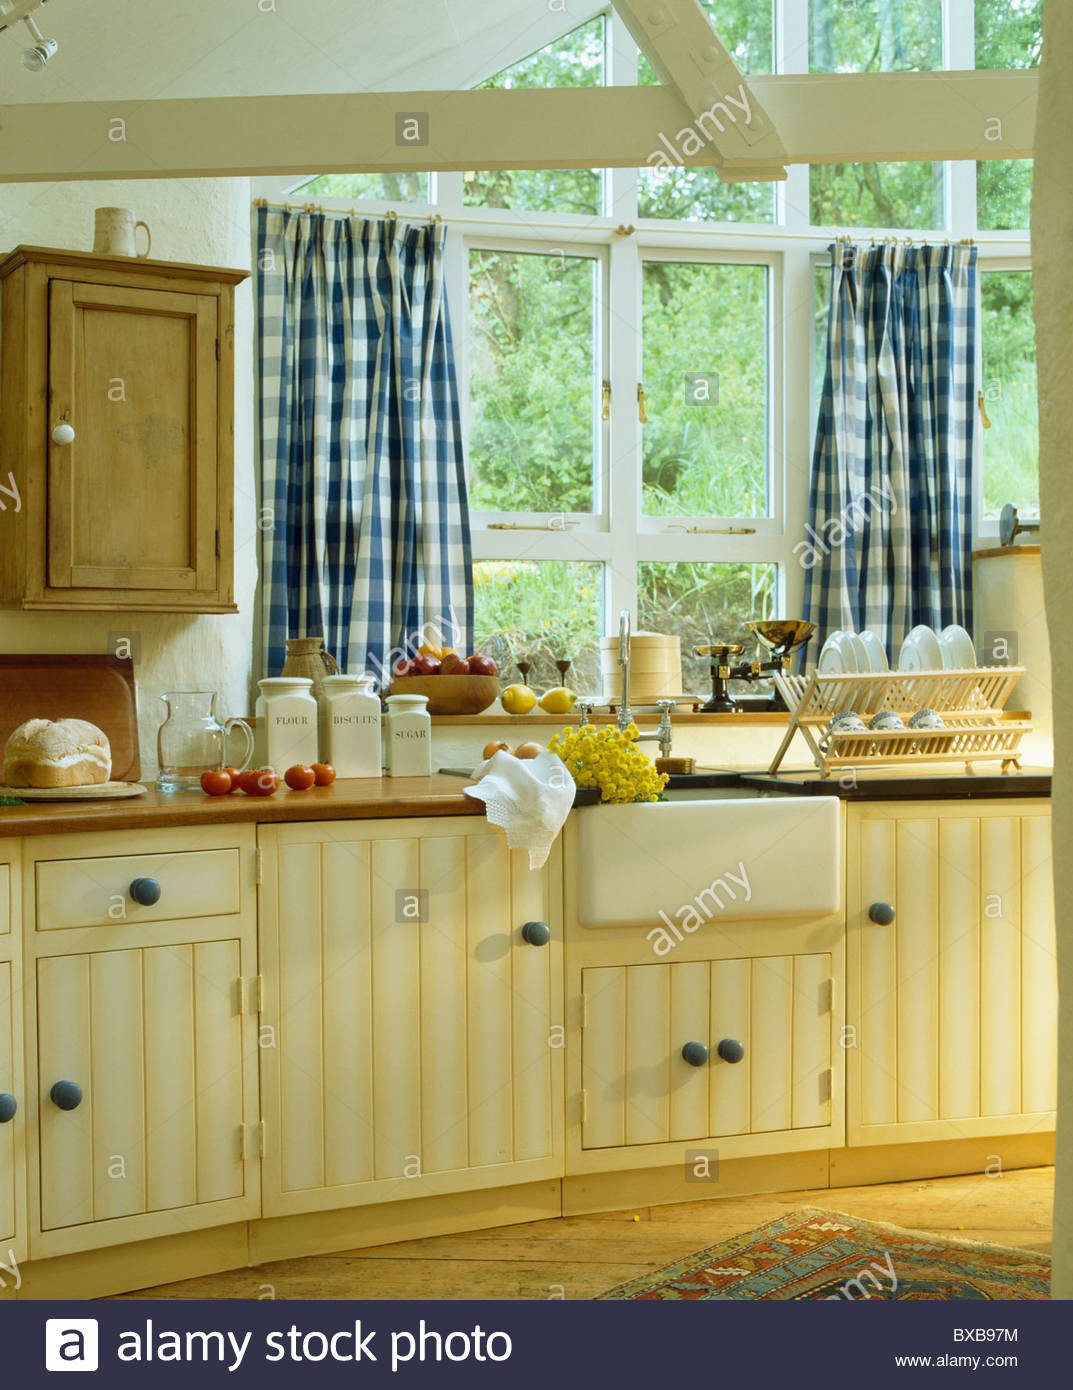 Blue And White Kitchen Curtains
 Blue white checked curtains on window above sink in